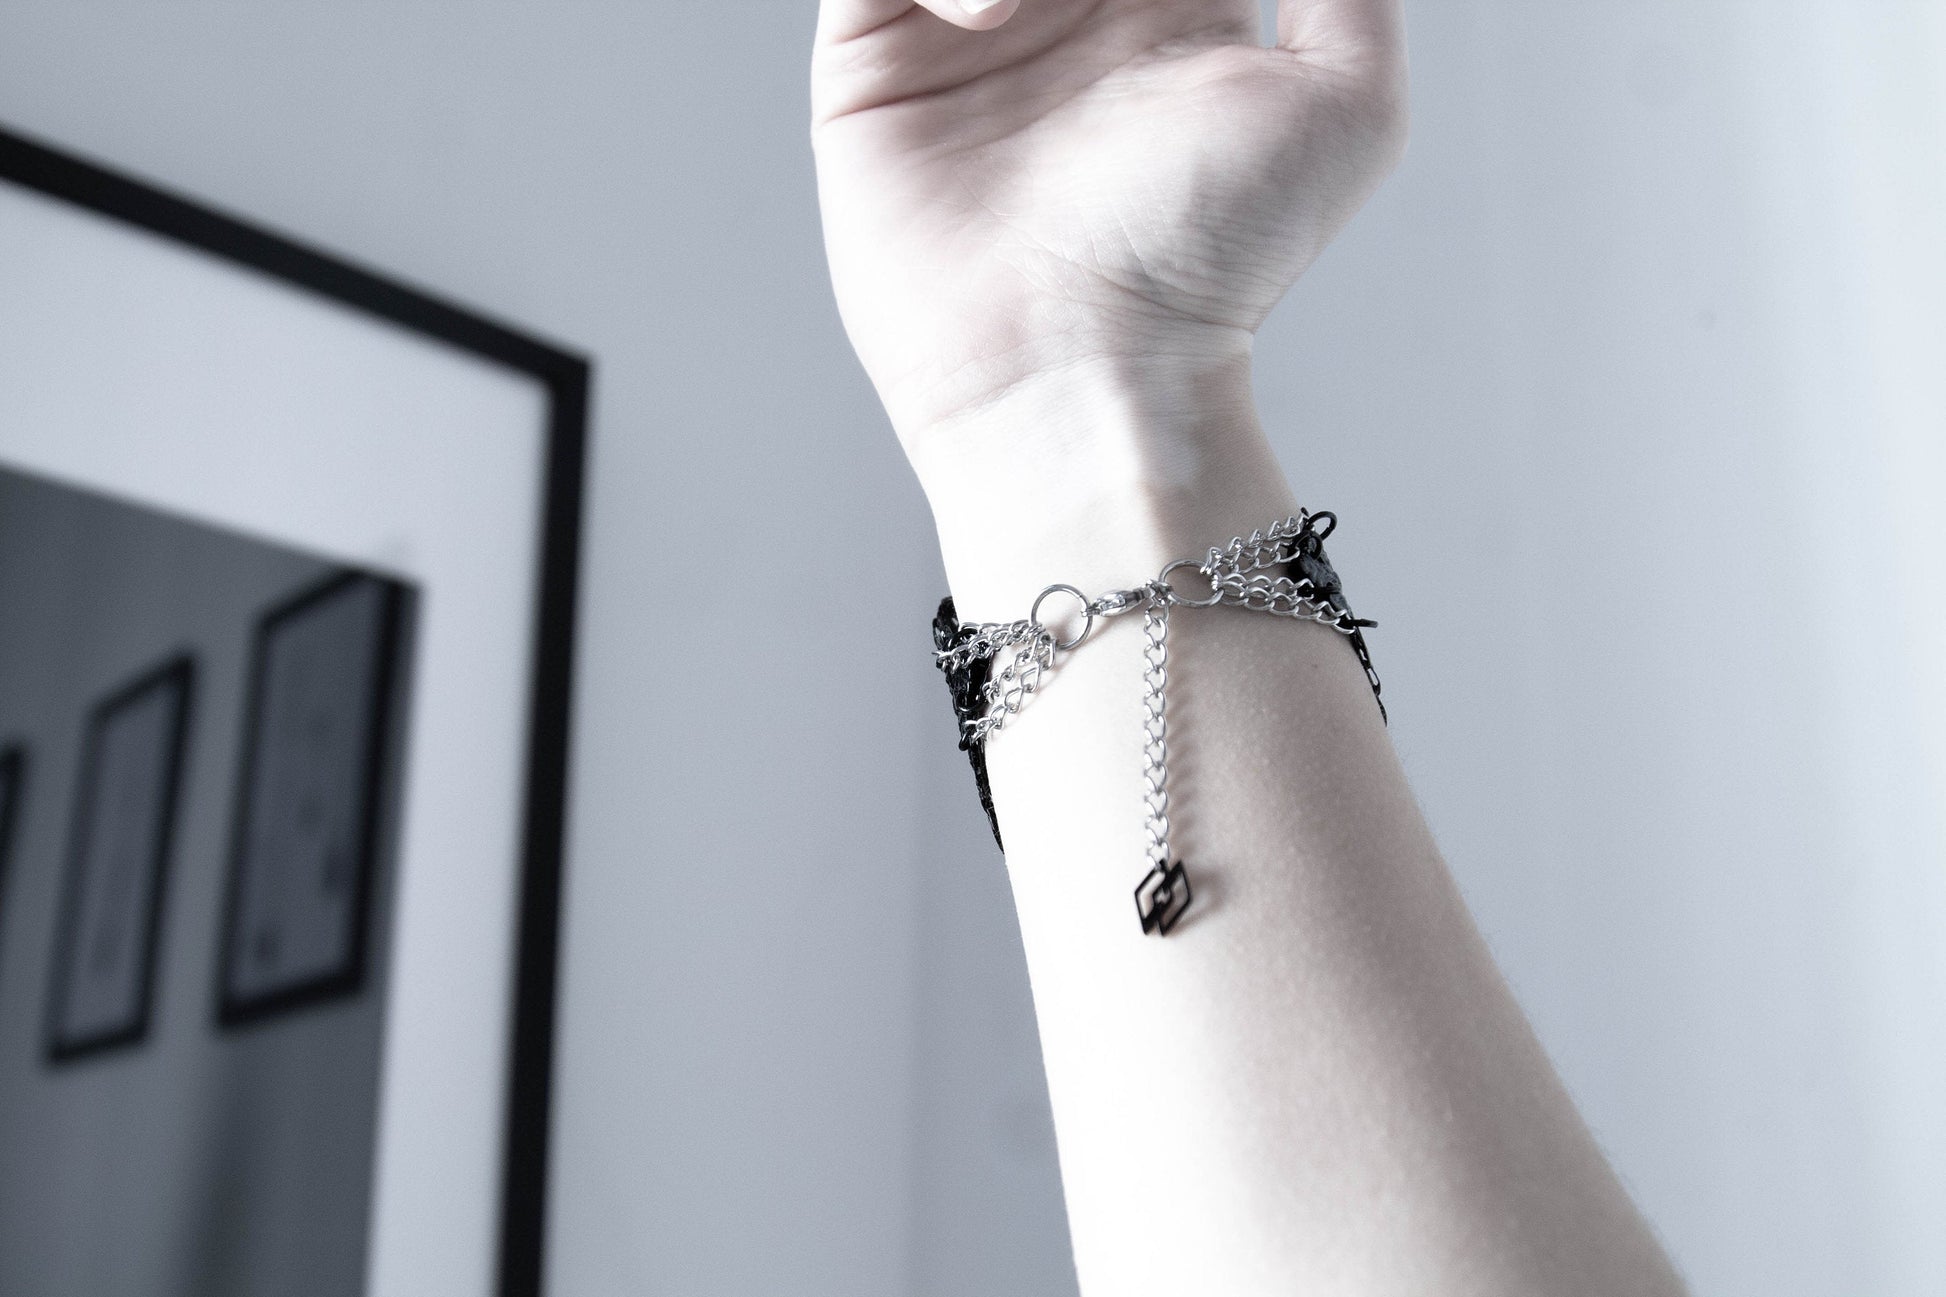 The rear of a model’s wrist is adorned with a Myril Jewels gothic bracelet featuring intricate, dark filigree that interlaces to form a lavish, ornamental design. This piece embodies the spirit of neo-gothic jewelry, a bold accessory suited for Witchcore enthusiasts, and a striking gift for those with a penchant for gothic-chic or festival fashion.